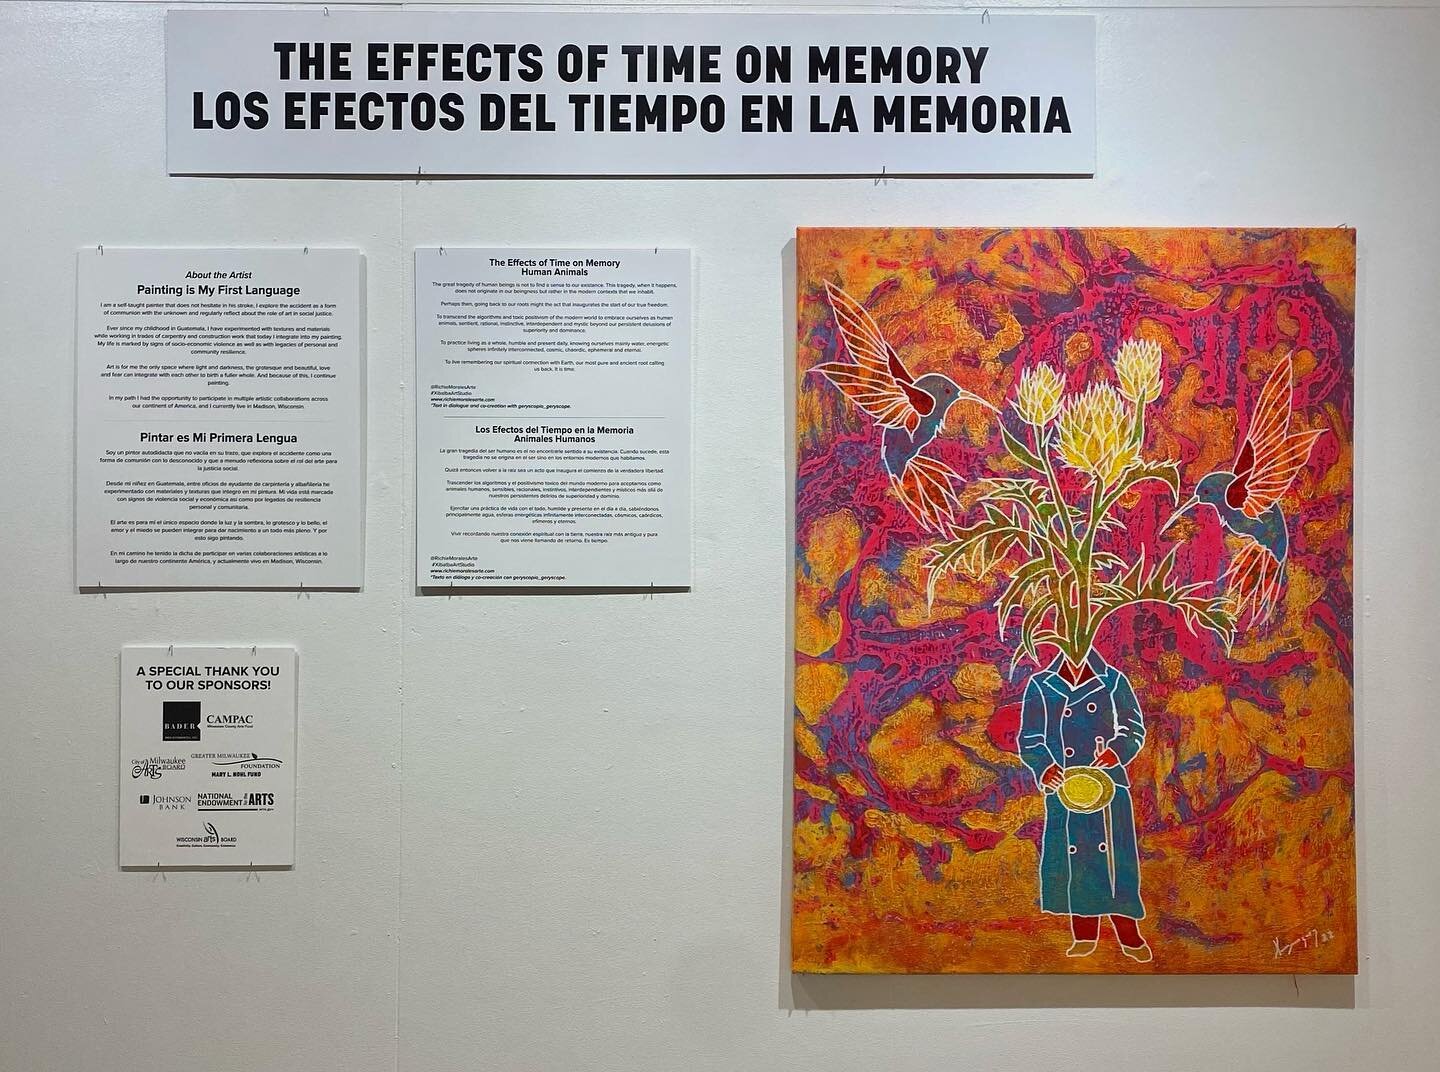 &ldquo;Free opening event Friday September 9th from 5 to 7 pm&rdquo;  At the @latinoartsinc  1028 S. Ninth St. Milwakee, WI 53204 

The effects of time on Memory 
&ldquo;Human Animals&rdquo; 

www.latinoartsinc.org
#XibalbaArtStudio 
www.richiemorale